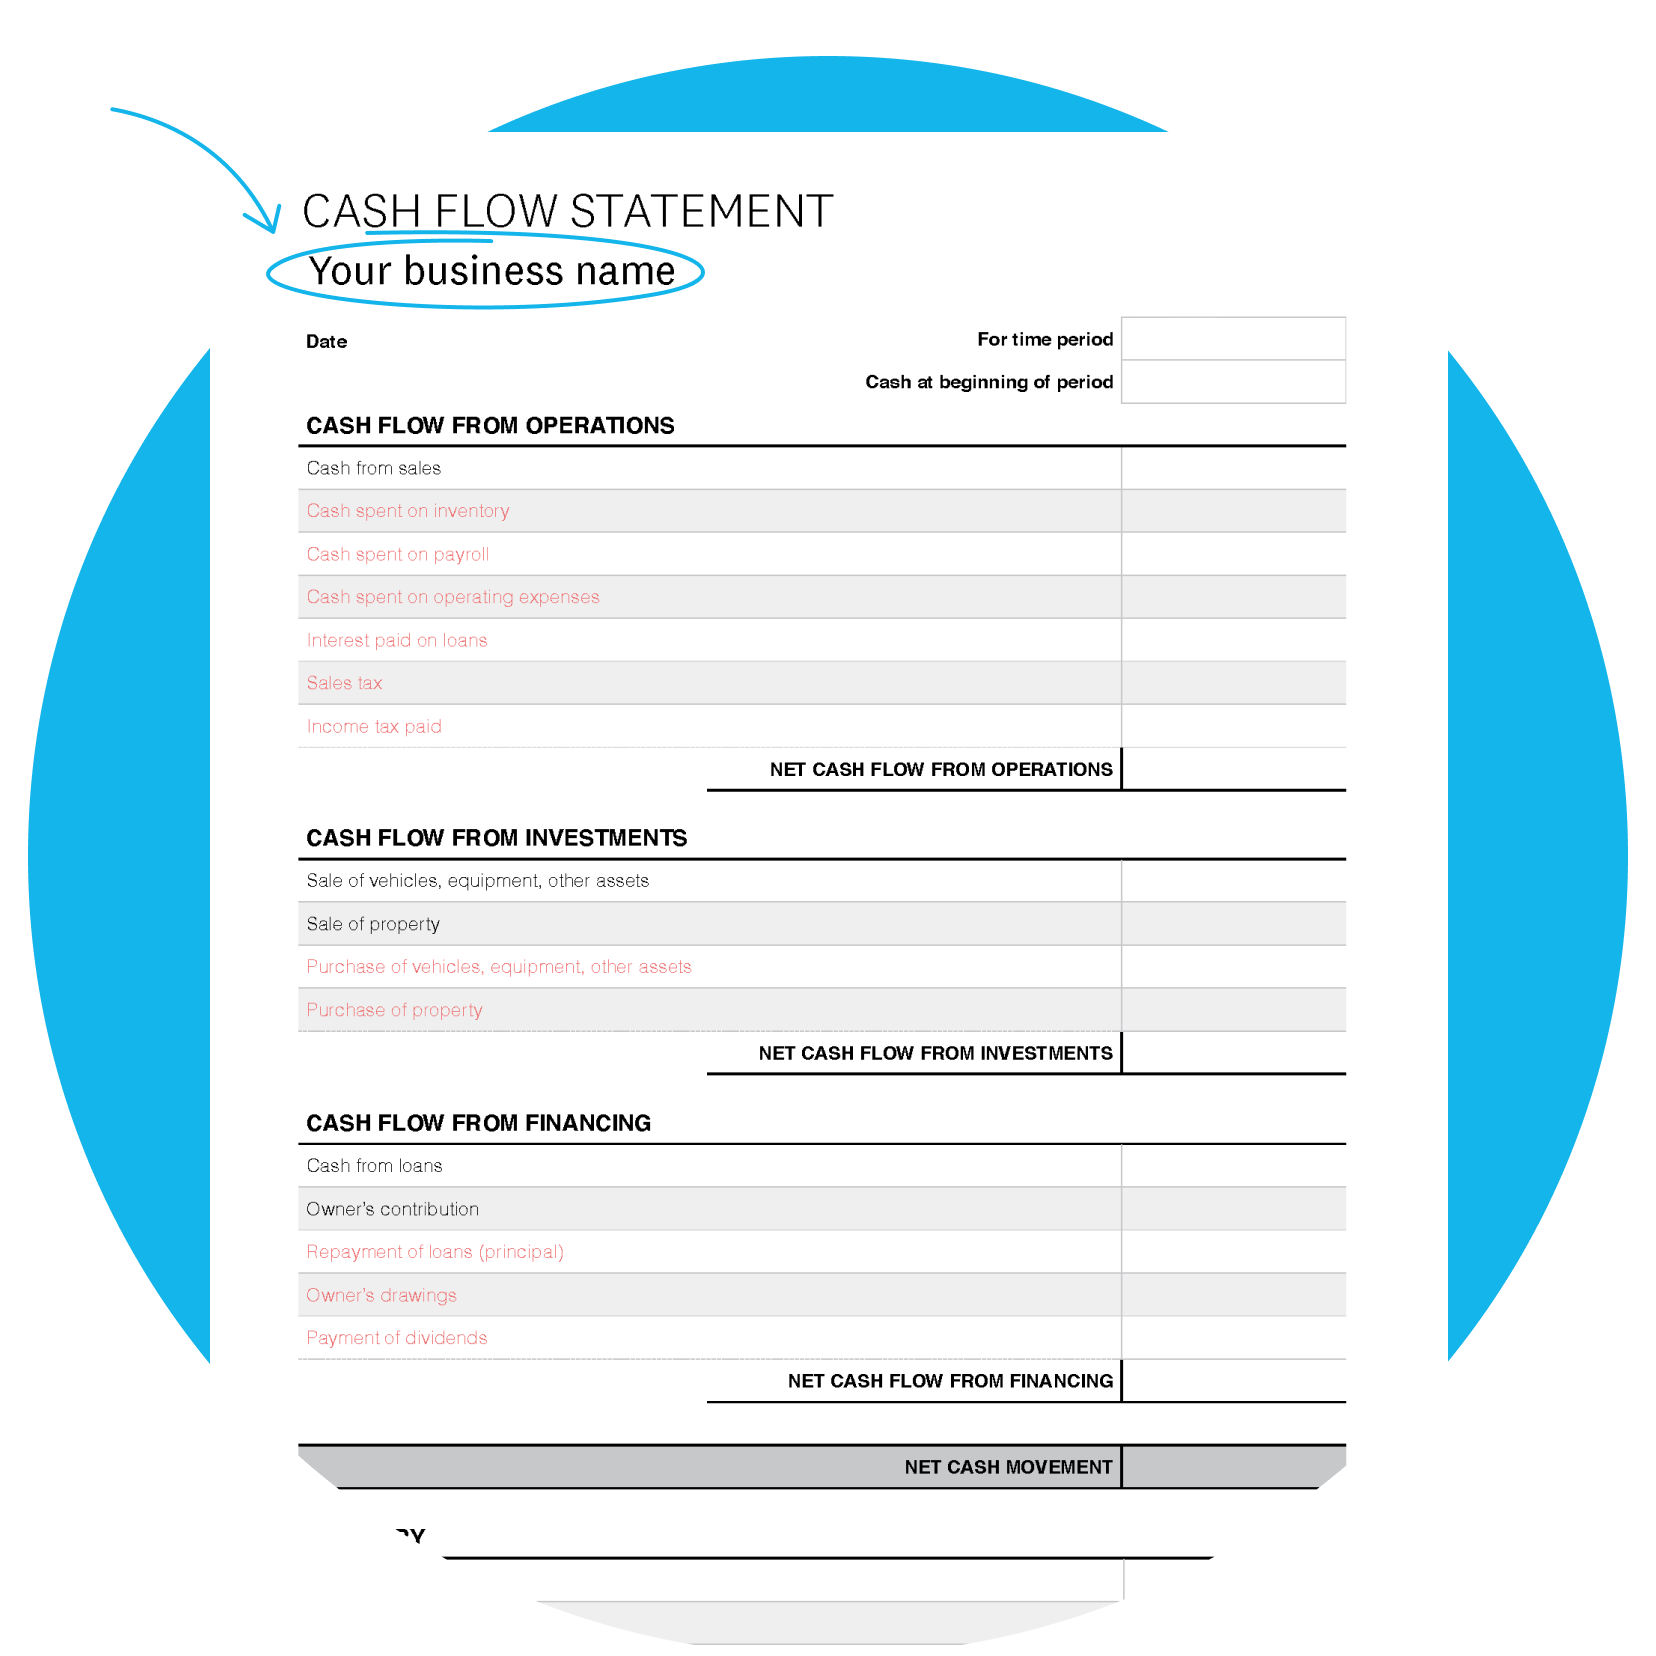 Cash flow statement template with 'your business name' circled